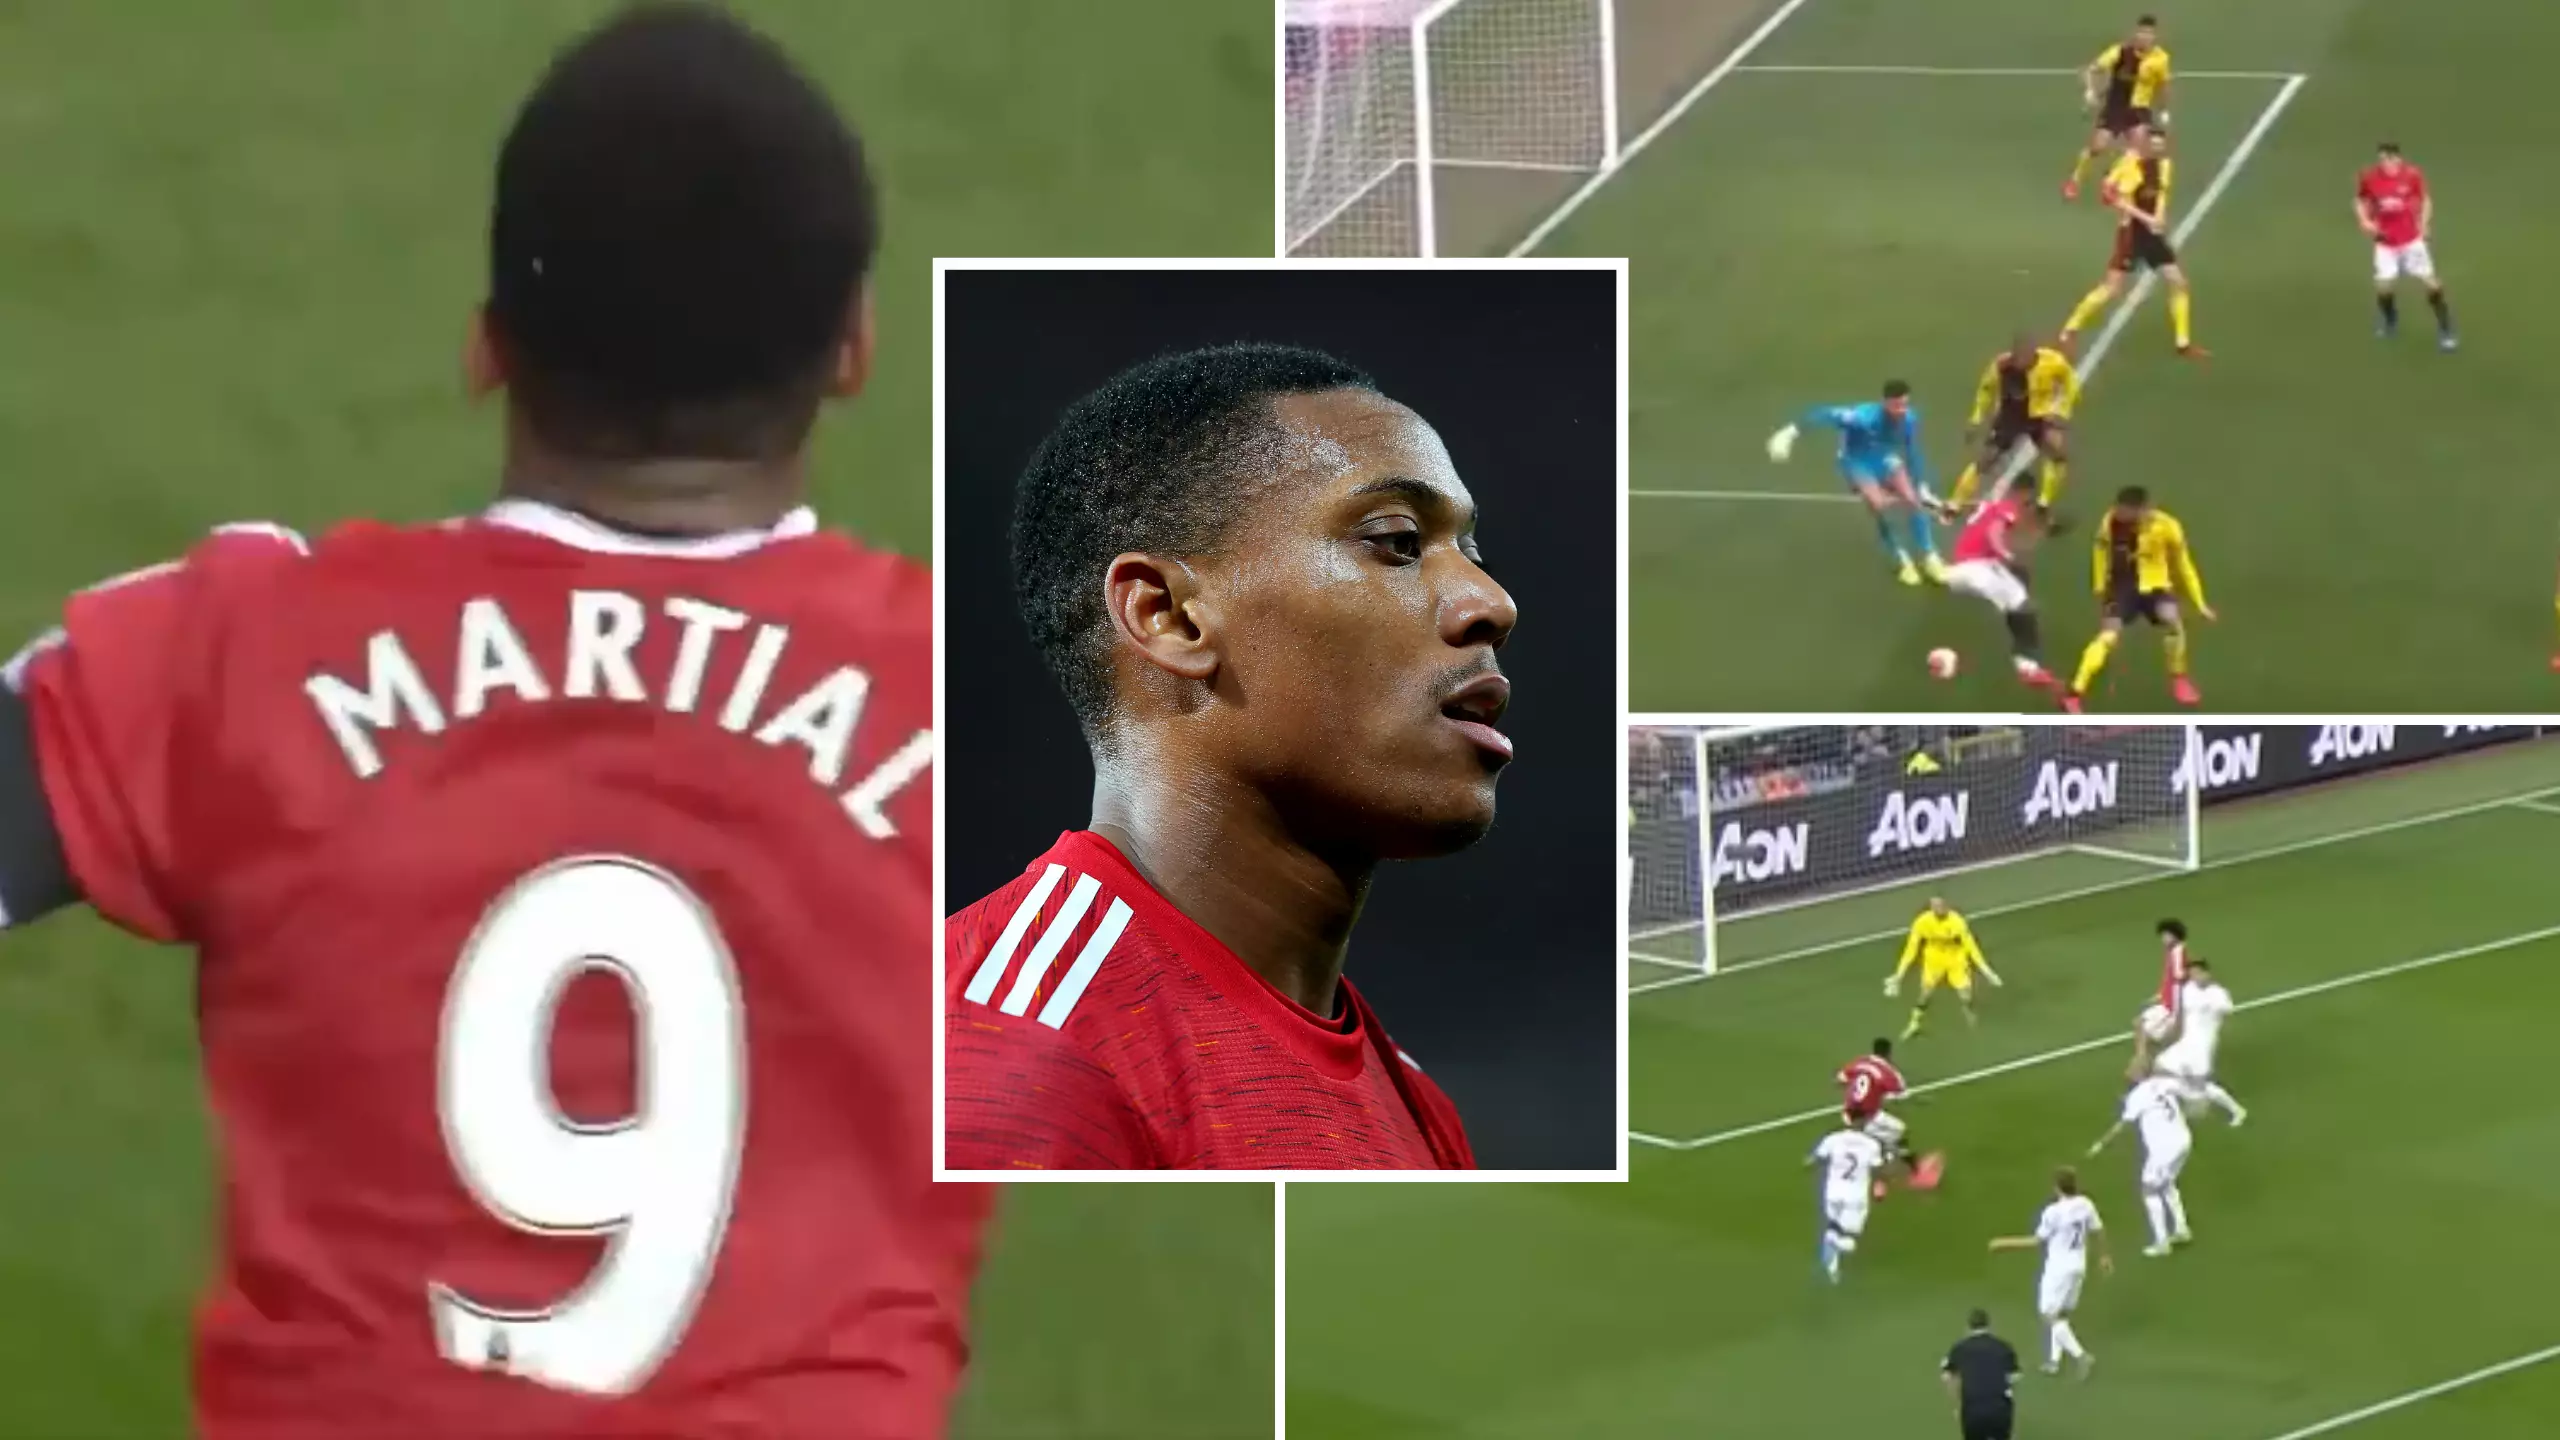 Twitter Thread 'Exposes' Anthony Martial As A 'Fraud' By Showing Incredible Solo Goals